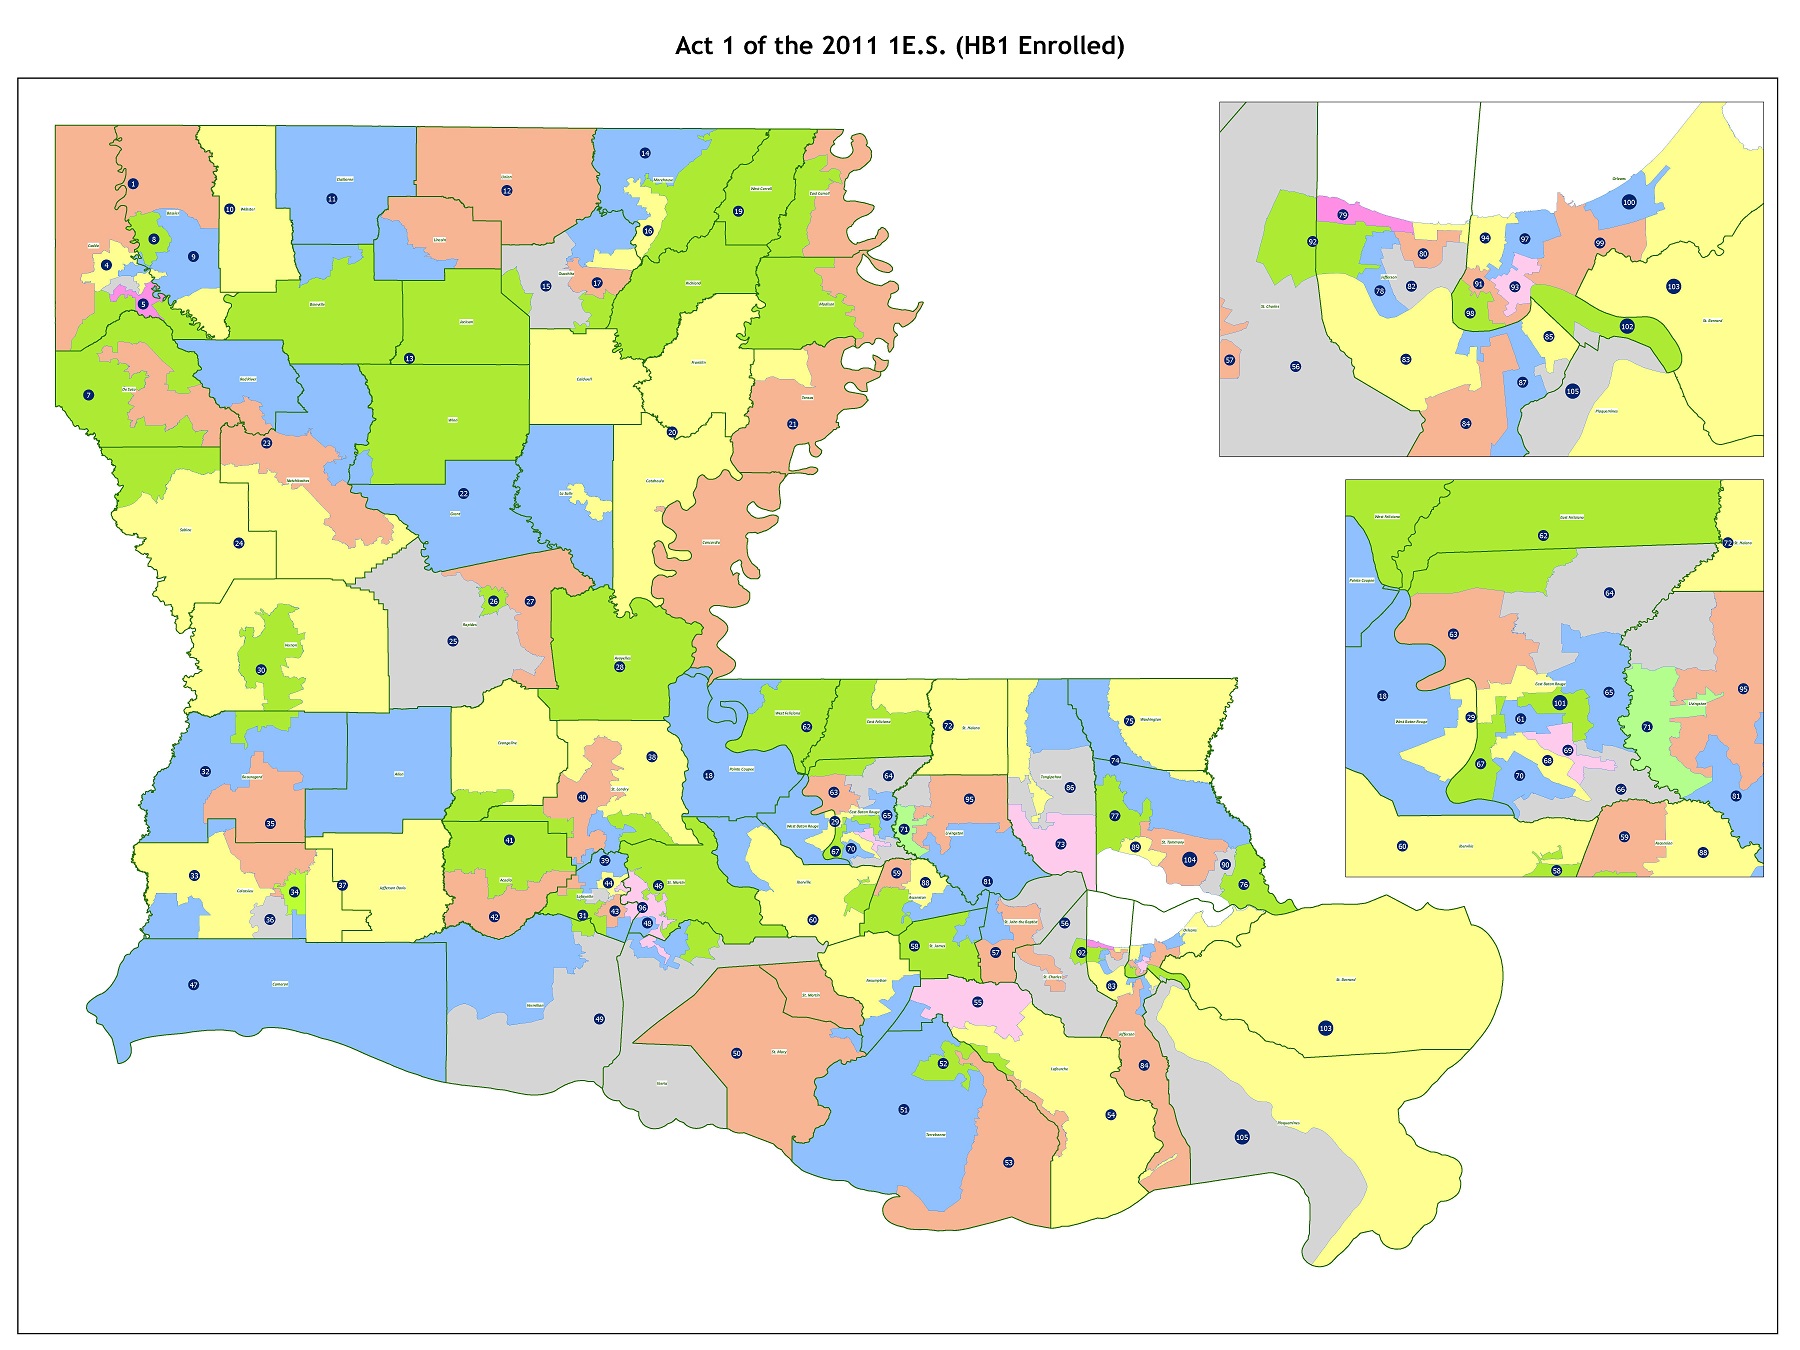 State redistricting information for Louisiana